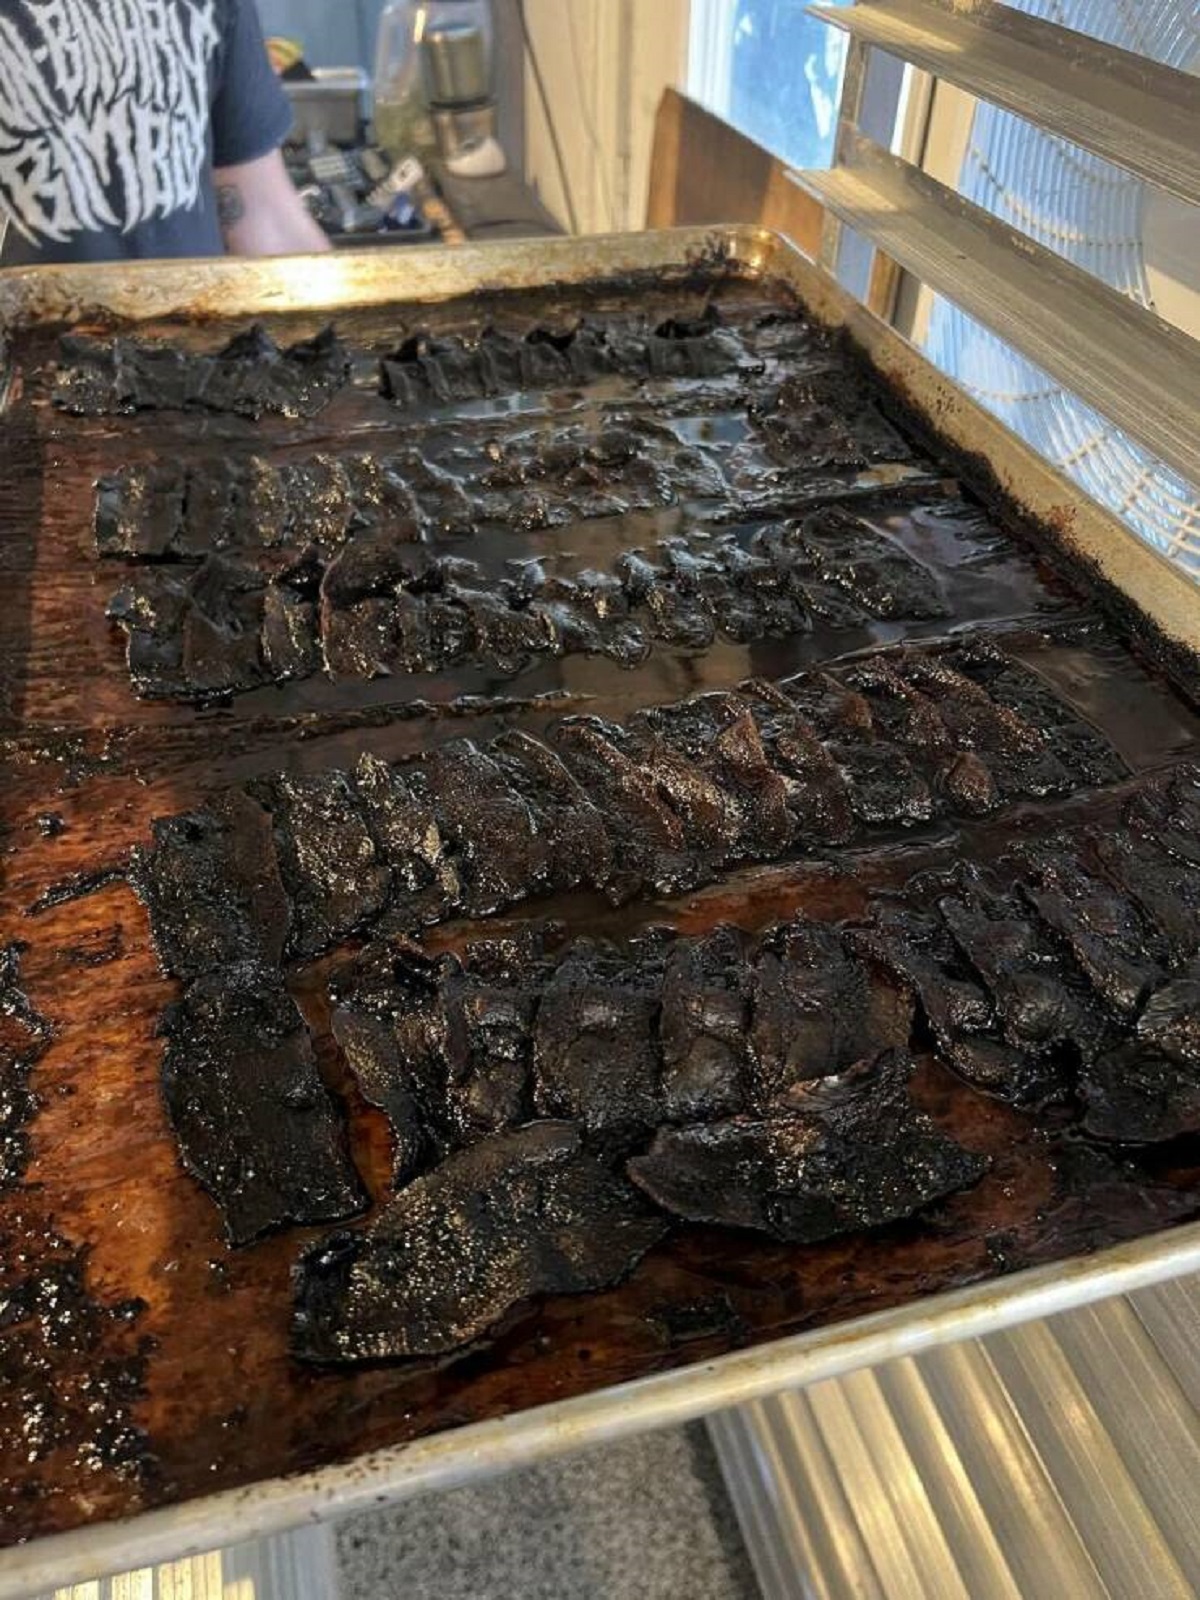 "Bacon forgotten in oven at work"